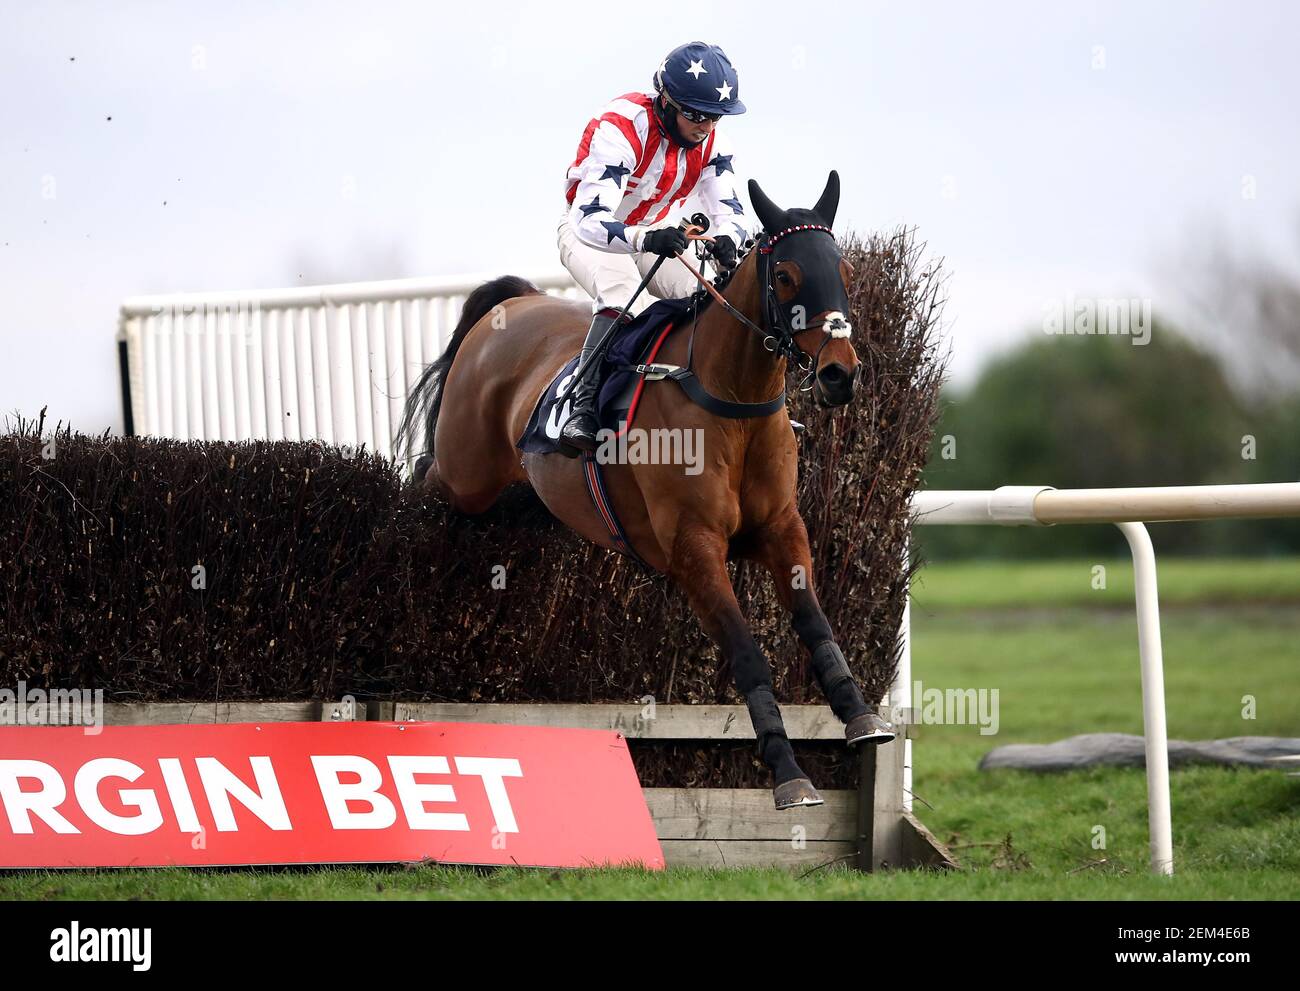 Beau Bay ridden by jockey Charlie Hammond clears the last fence on the way to winning the Virgin Bet Veterans' Handicap Chase (Leg 2 Of The Veterans' Chase Series) at Doncaster Racecourse. Picture date: Wednesday February 24, 2021. Stock Photo